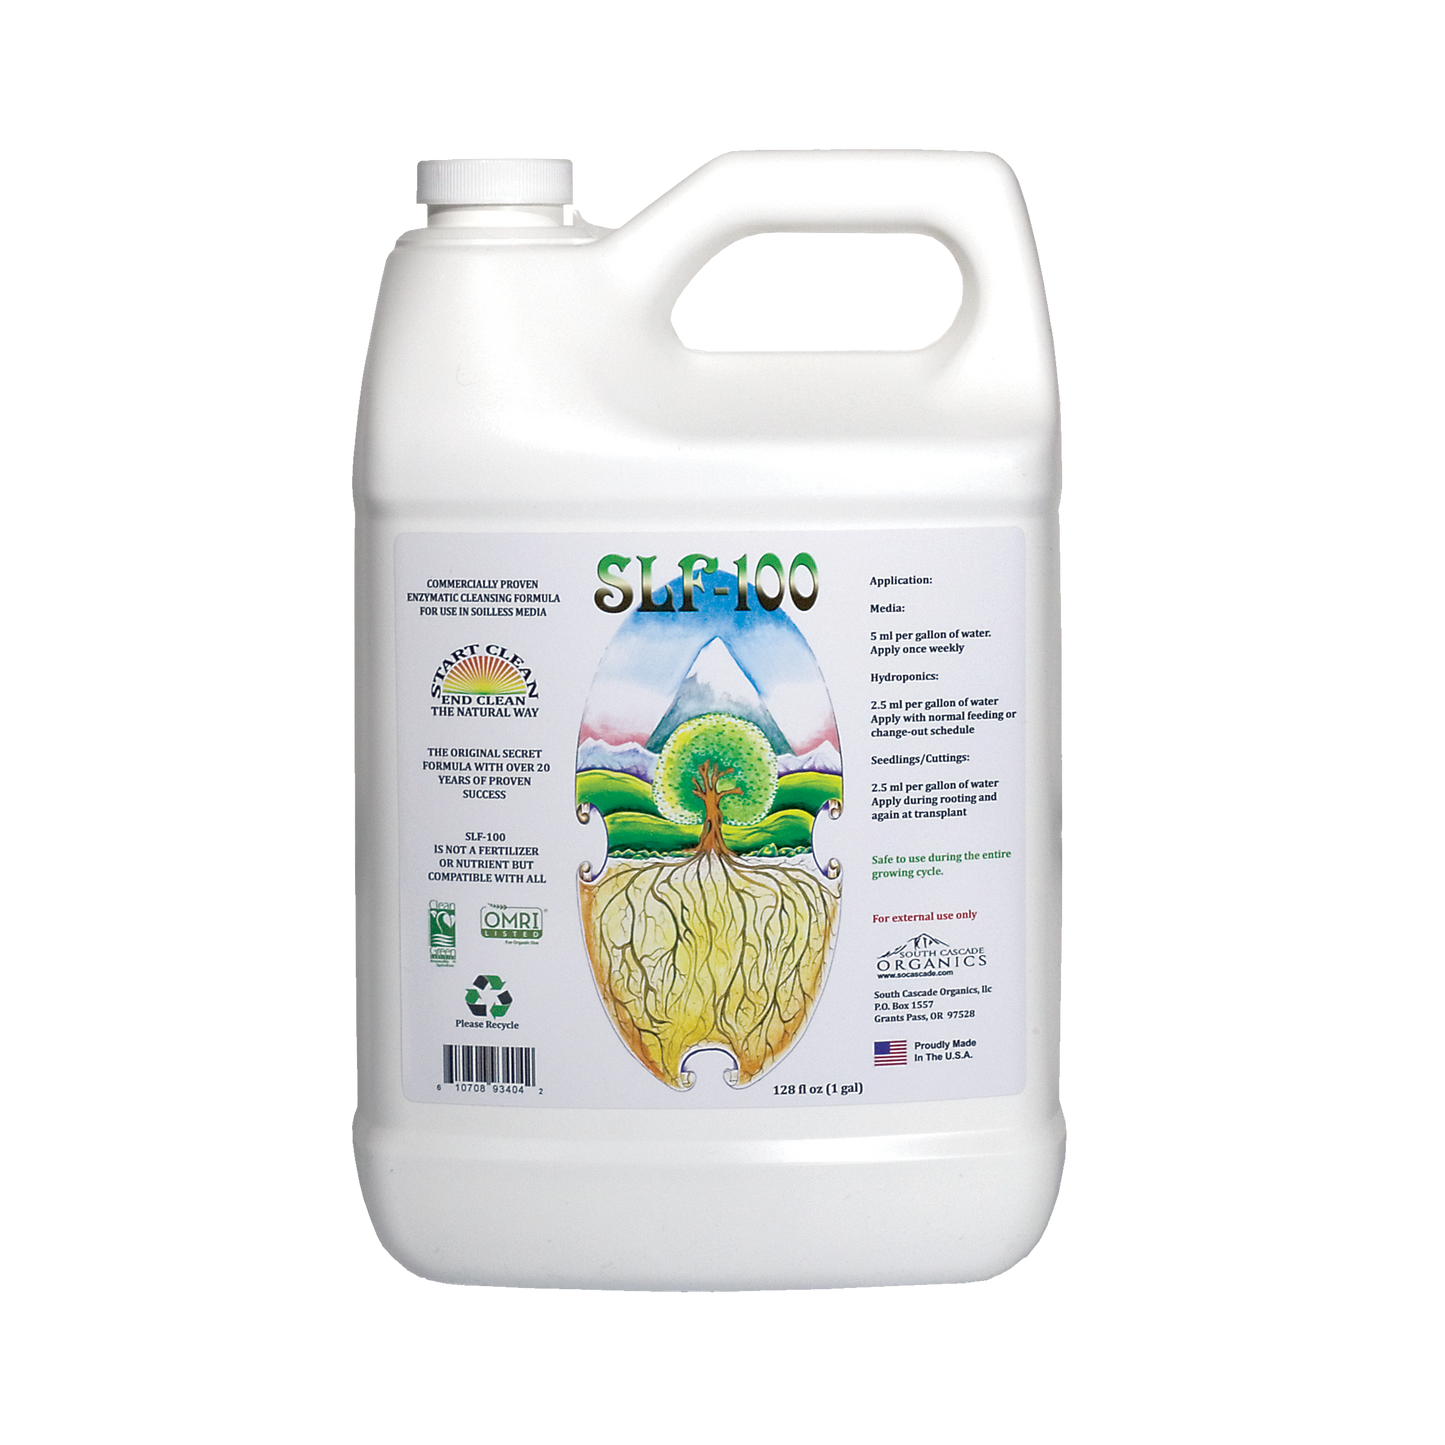 SLF-100 Enzyme Cleaner